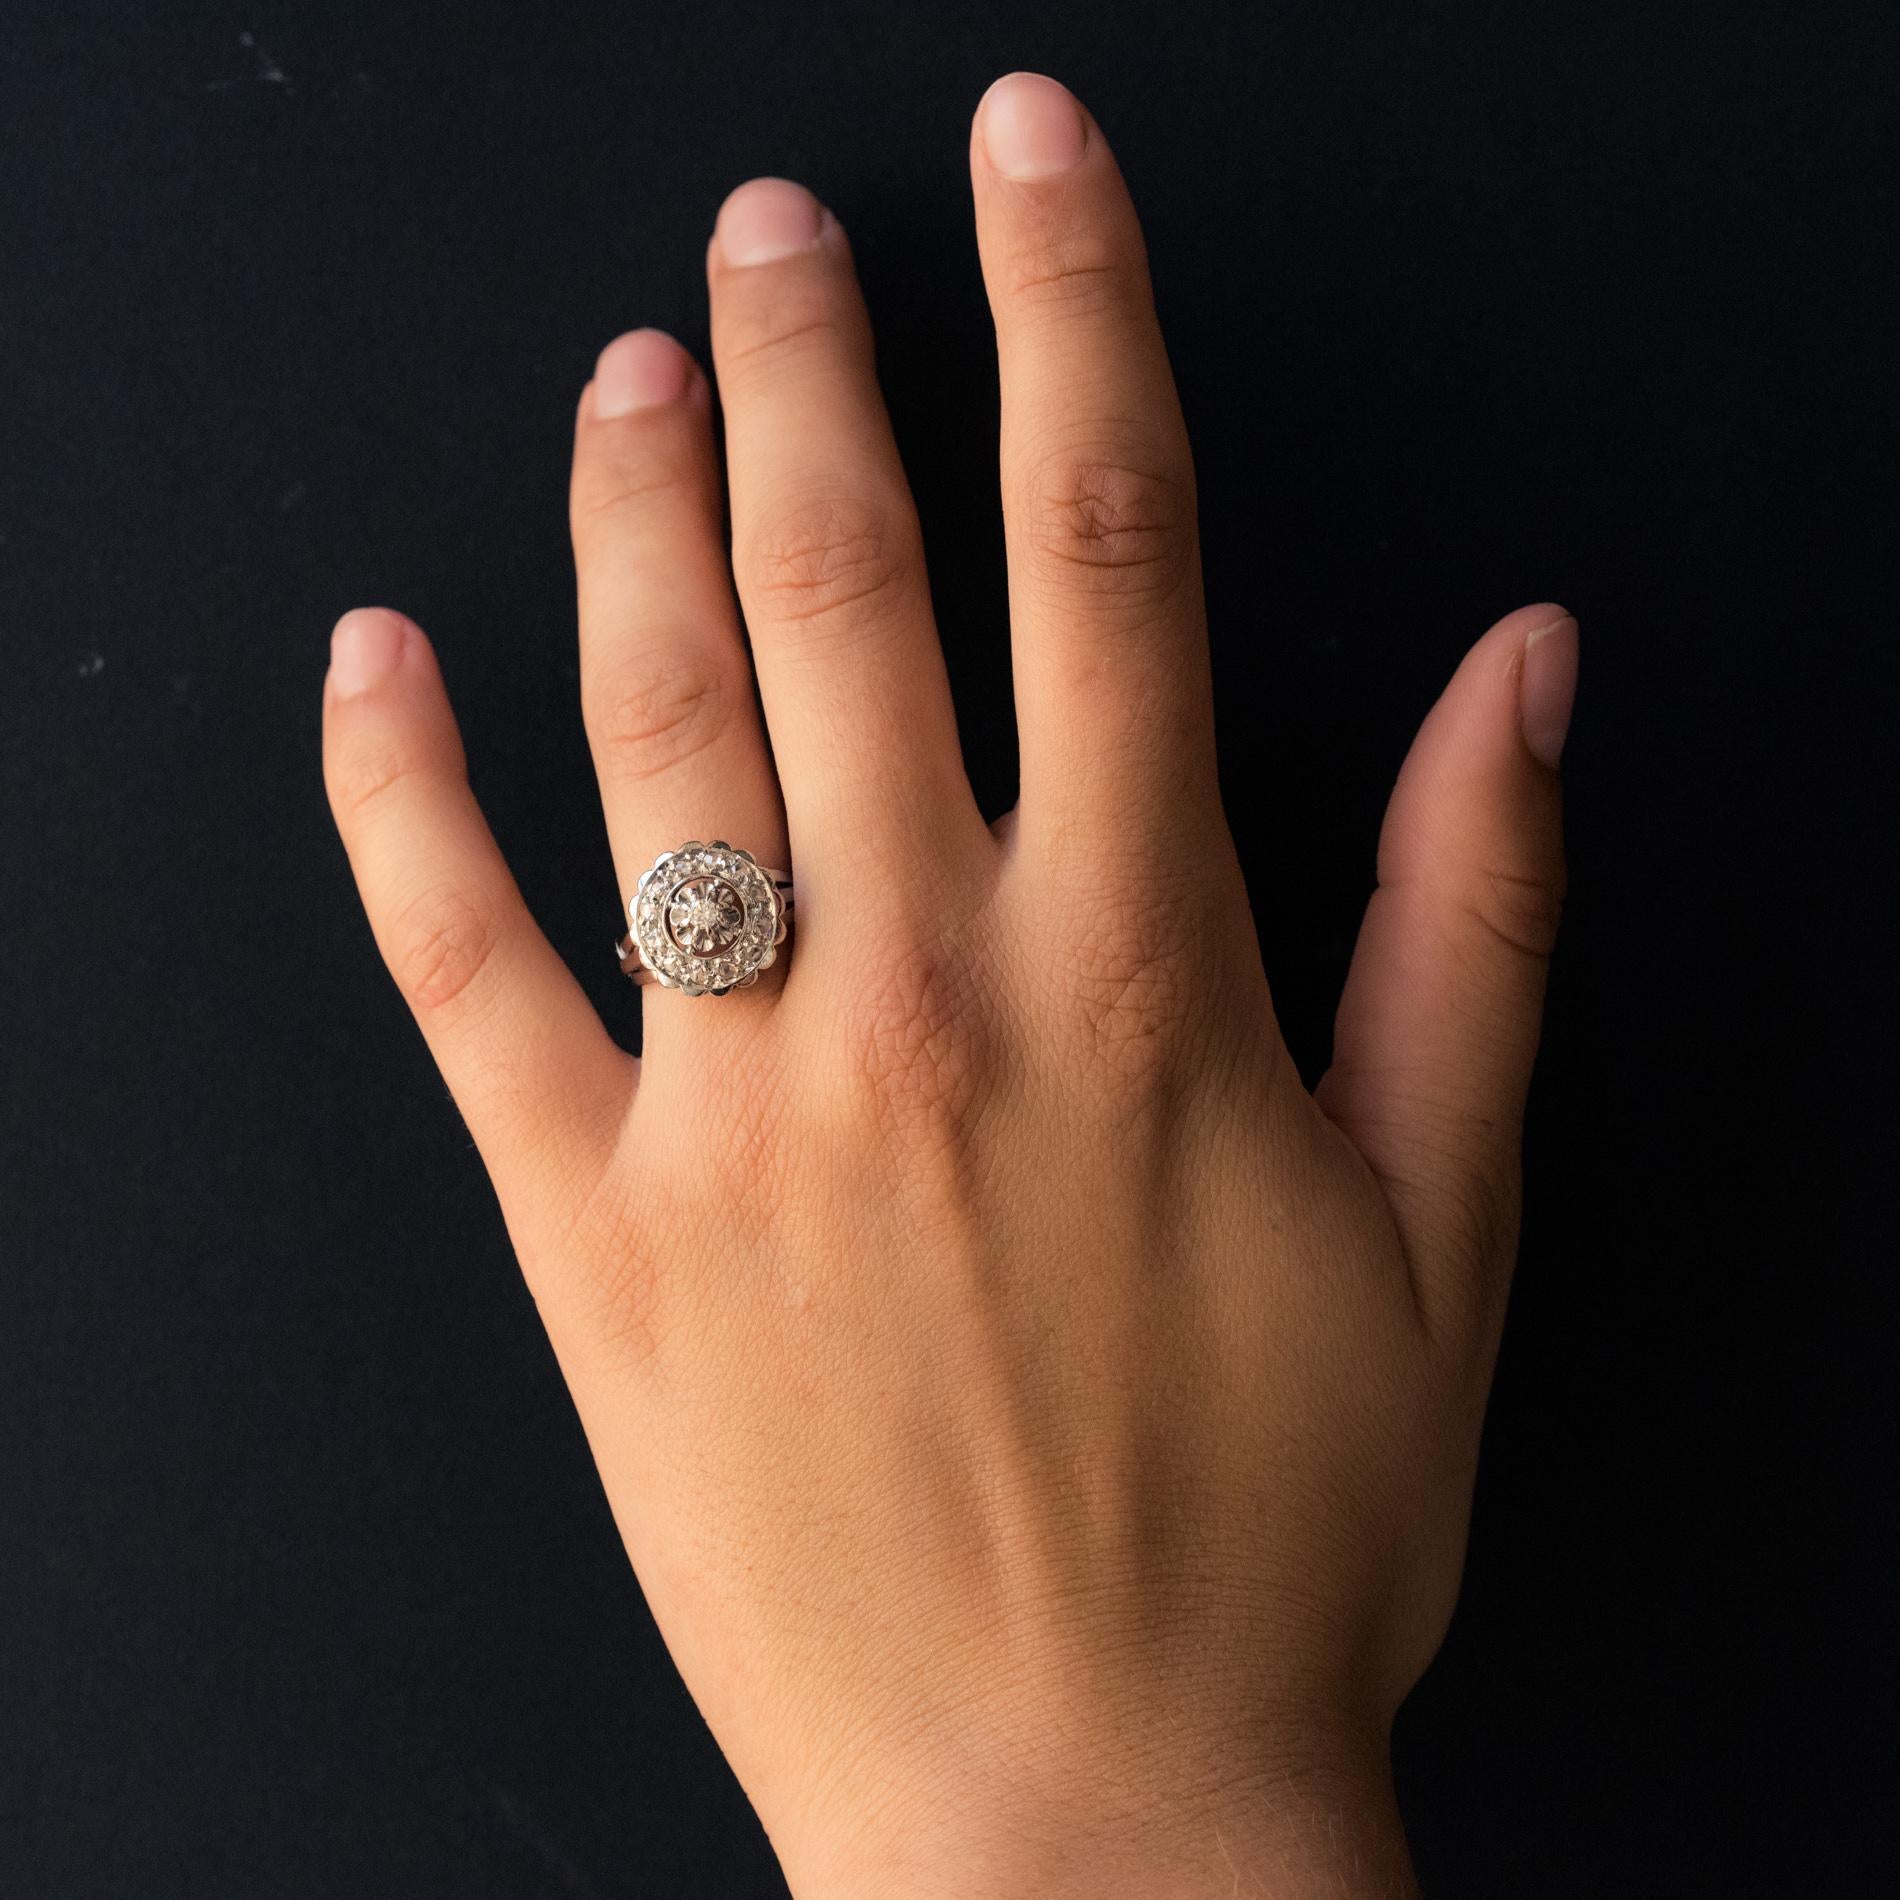 Ring in 18 karat white gold, eagle's head hallmark.
Round in shape, the slightly raised and pierced mounting is set with rose- cut diamonds and at its center, a modern brilliant- cut diamond retained with claws. The ring is made up of three flat